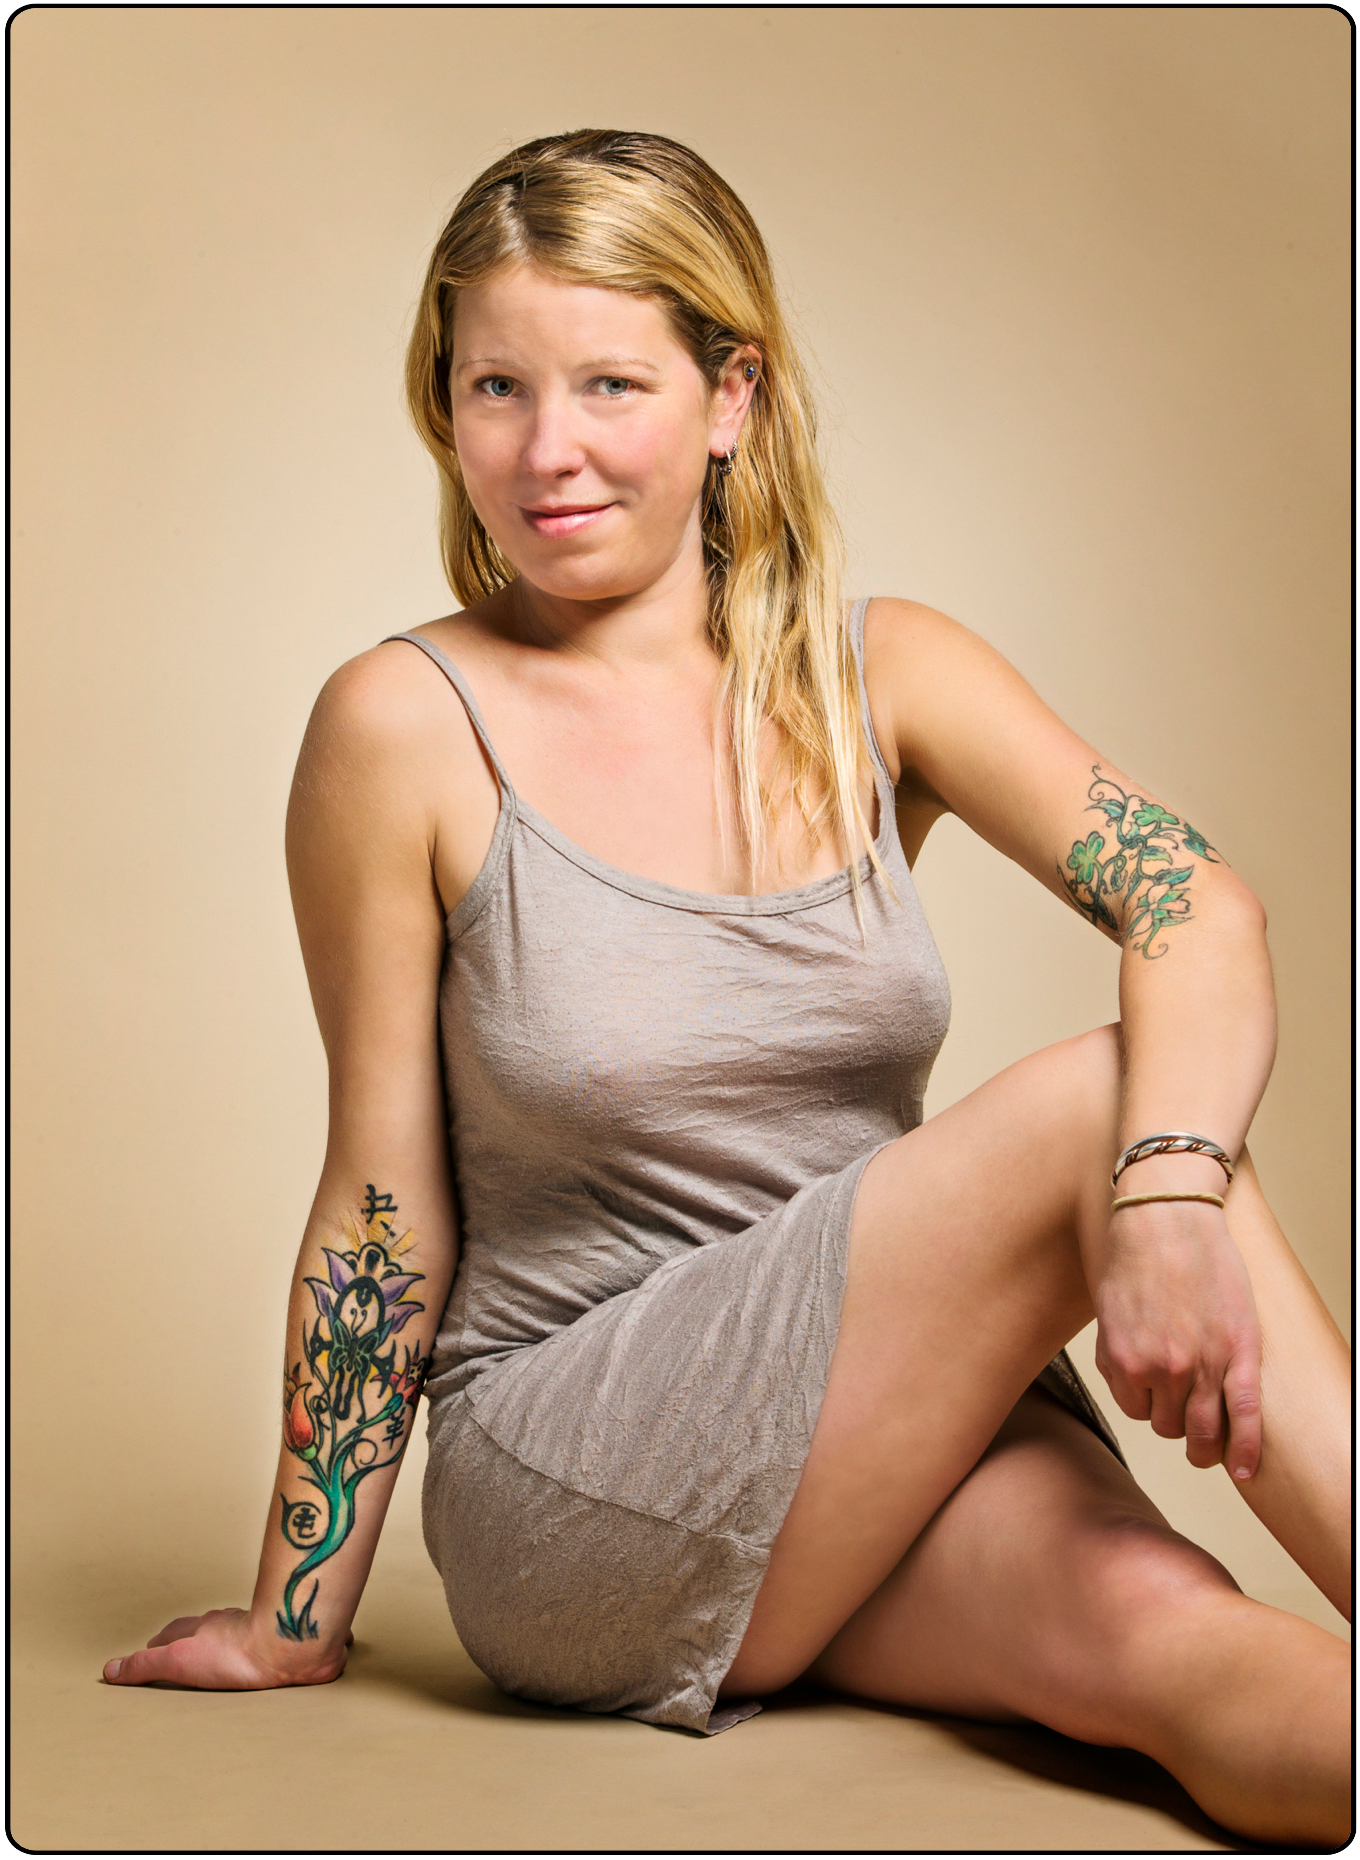 Studio portrait of tattoos on an attractive young blonde haired Caucasian woman